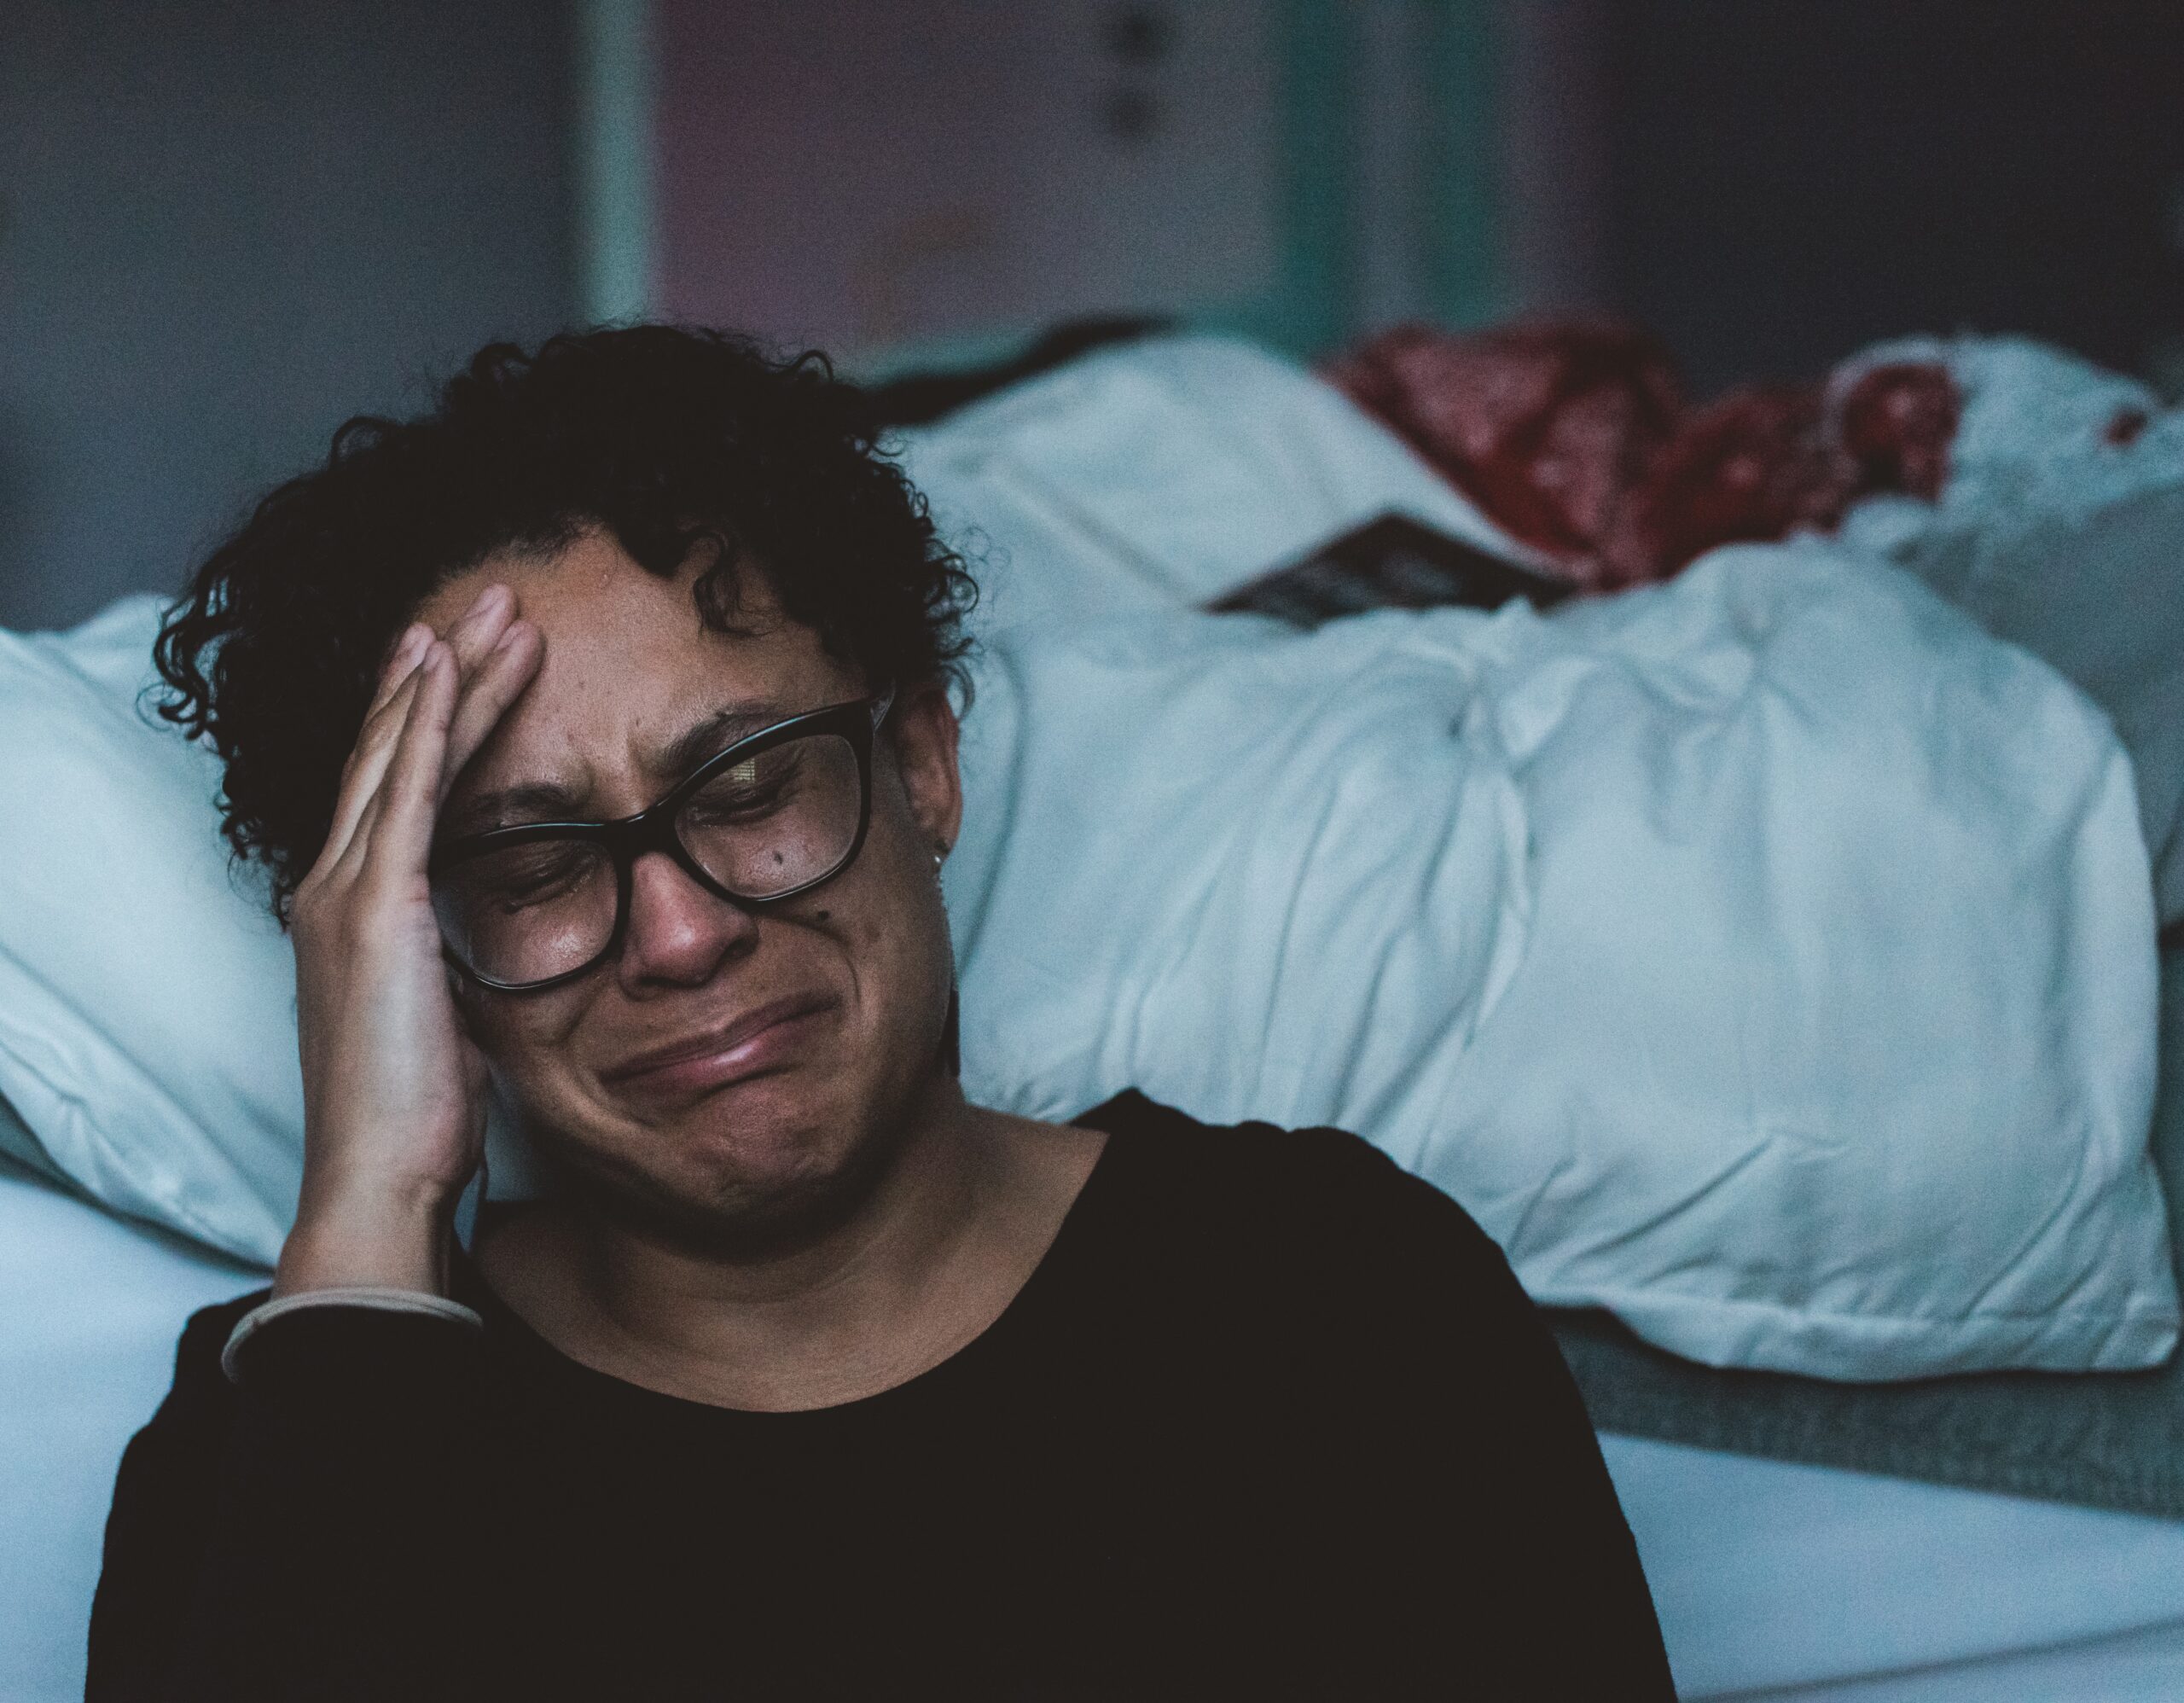 Woman holding head and crying next to bed